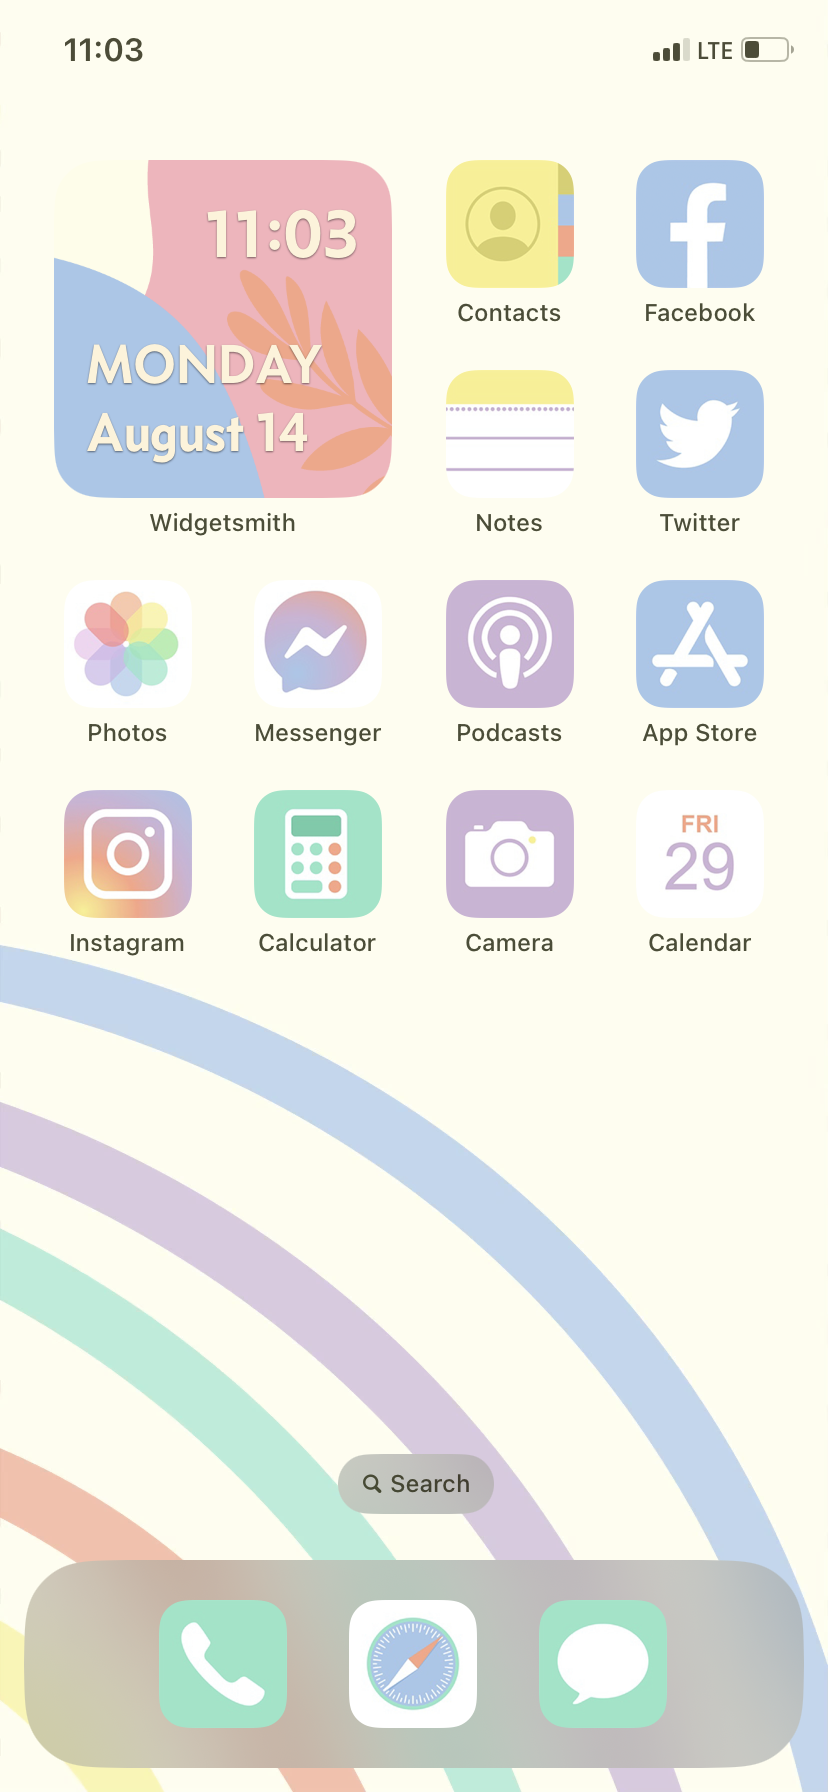 Iphone Wallpapers designs, themes, templates and downloadable